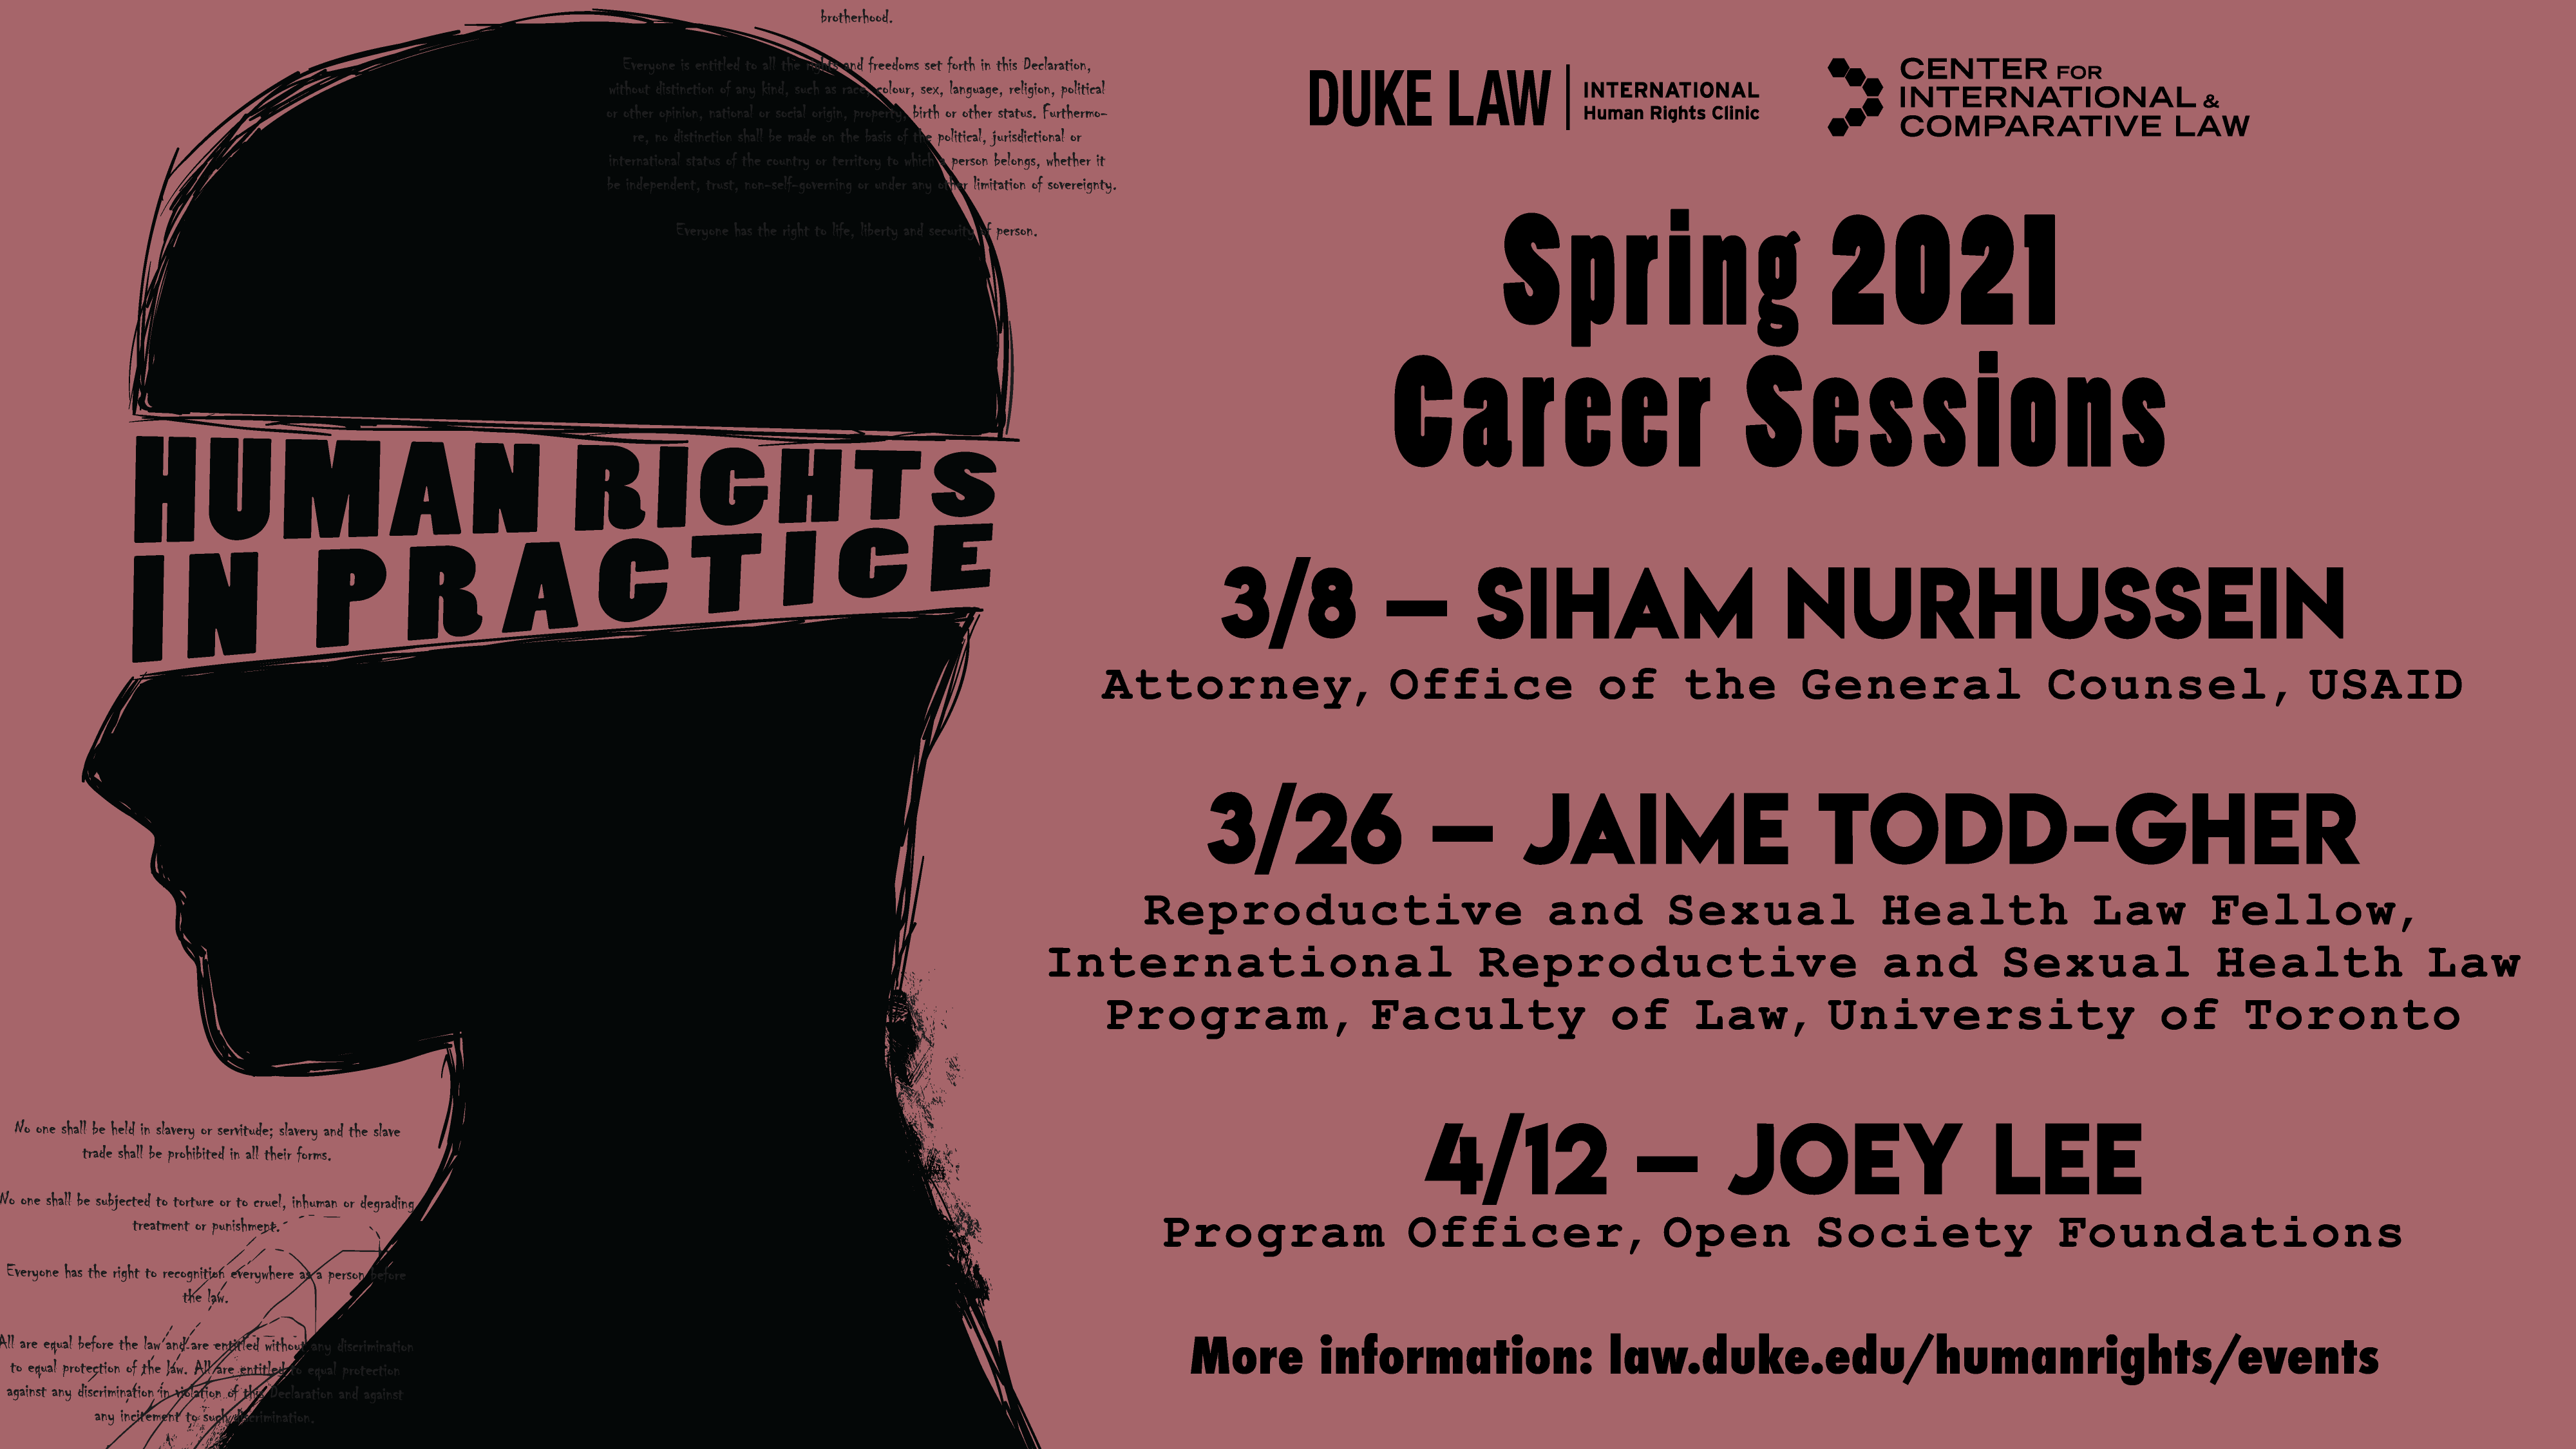 Career Sessions for International Human Rights -- 12 April: Joey Lee